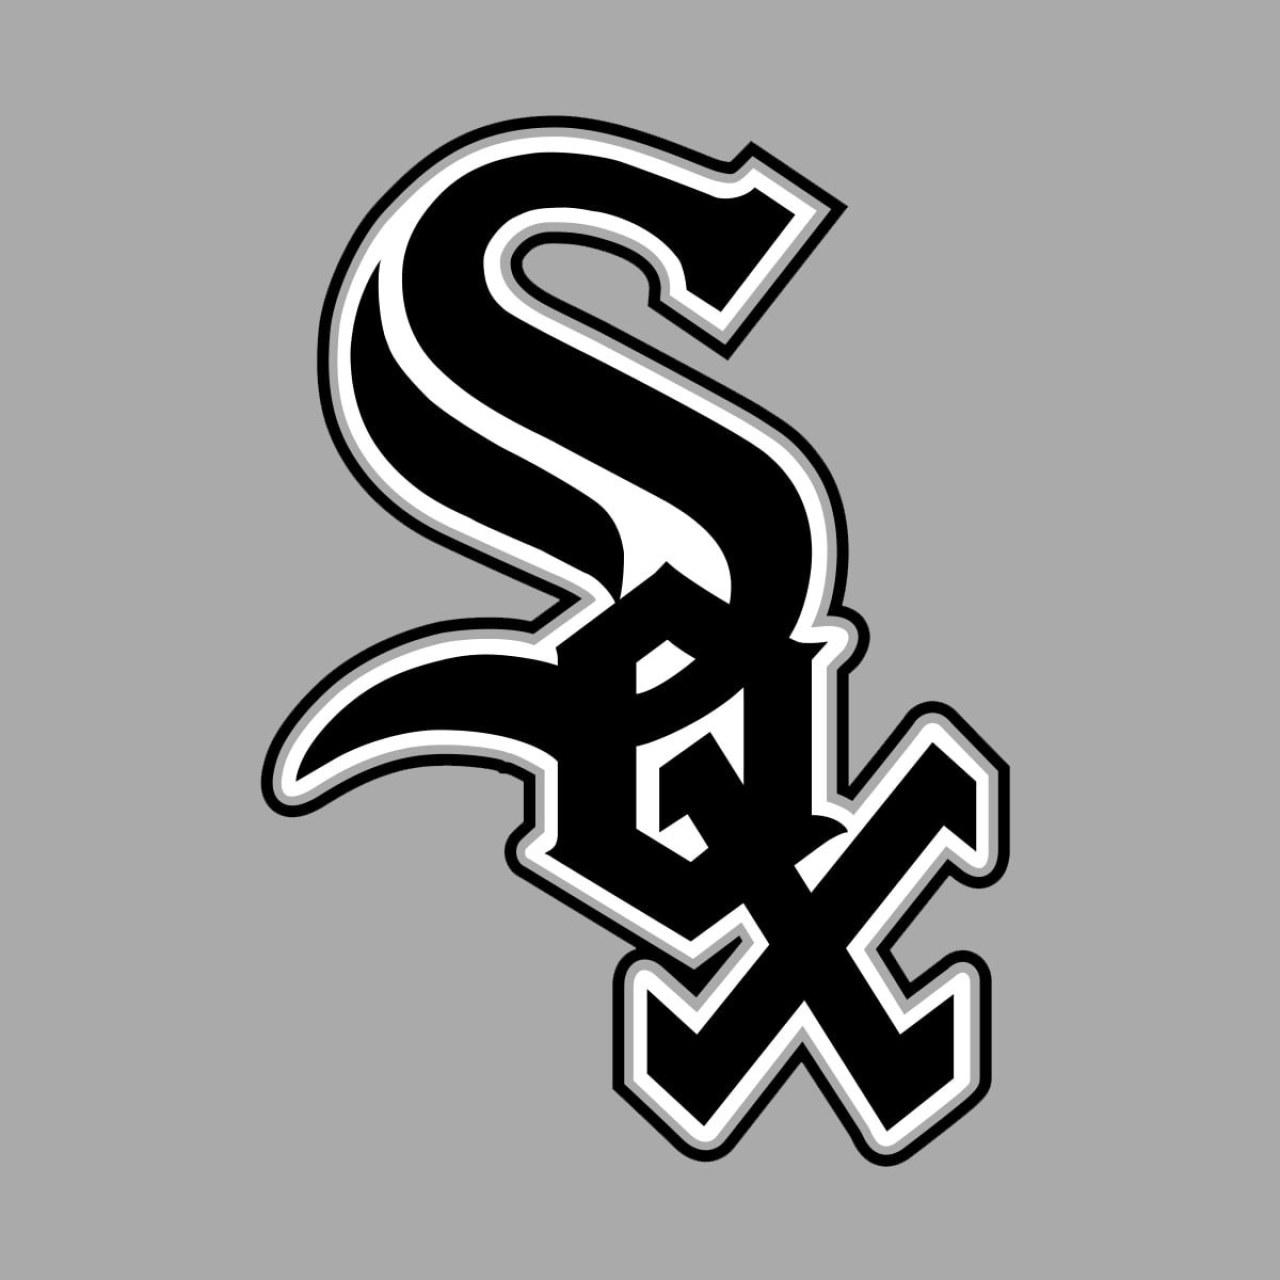 Chicago White Sox Logo Wallpapers - Top Free Chicago White Sox Logo ...